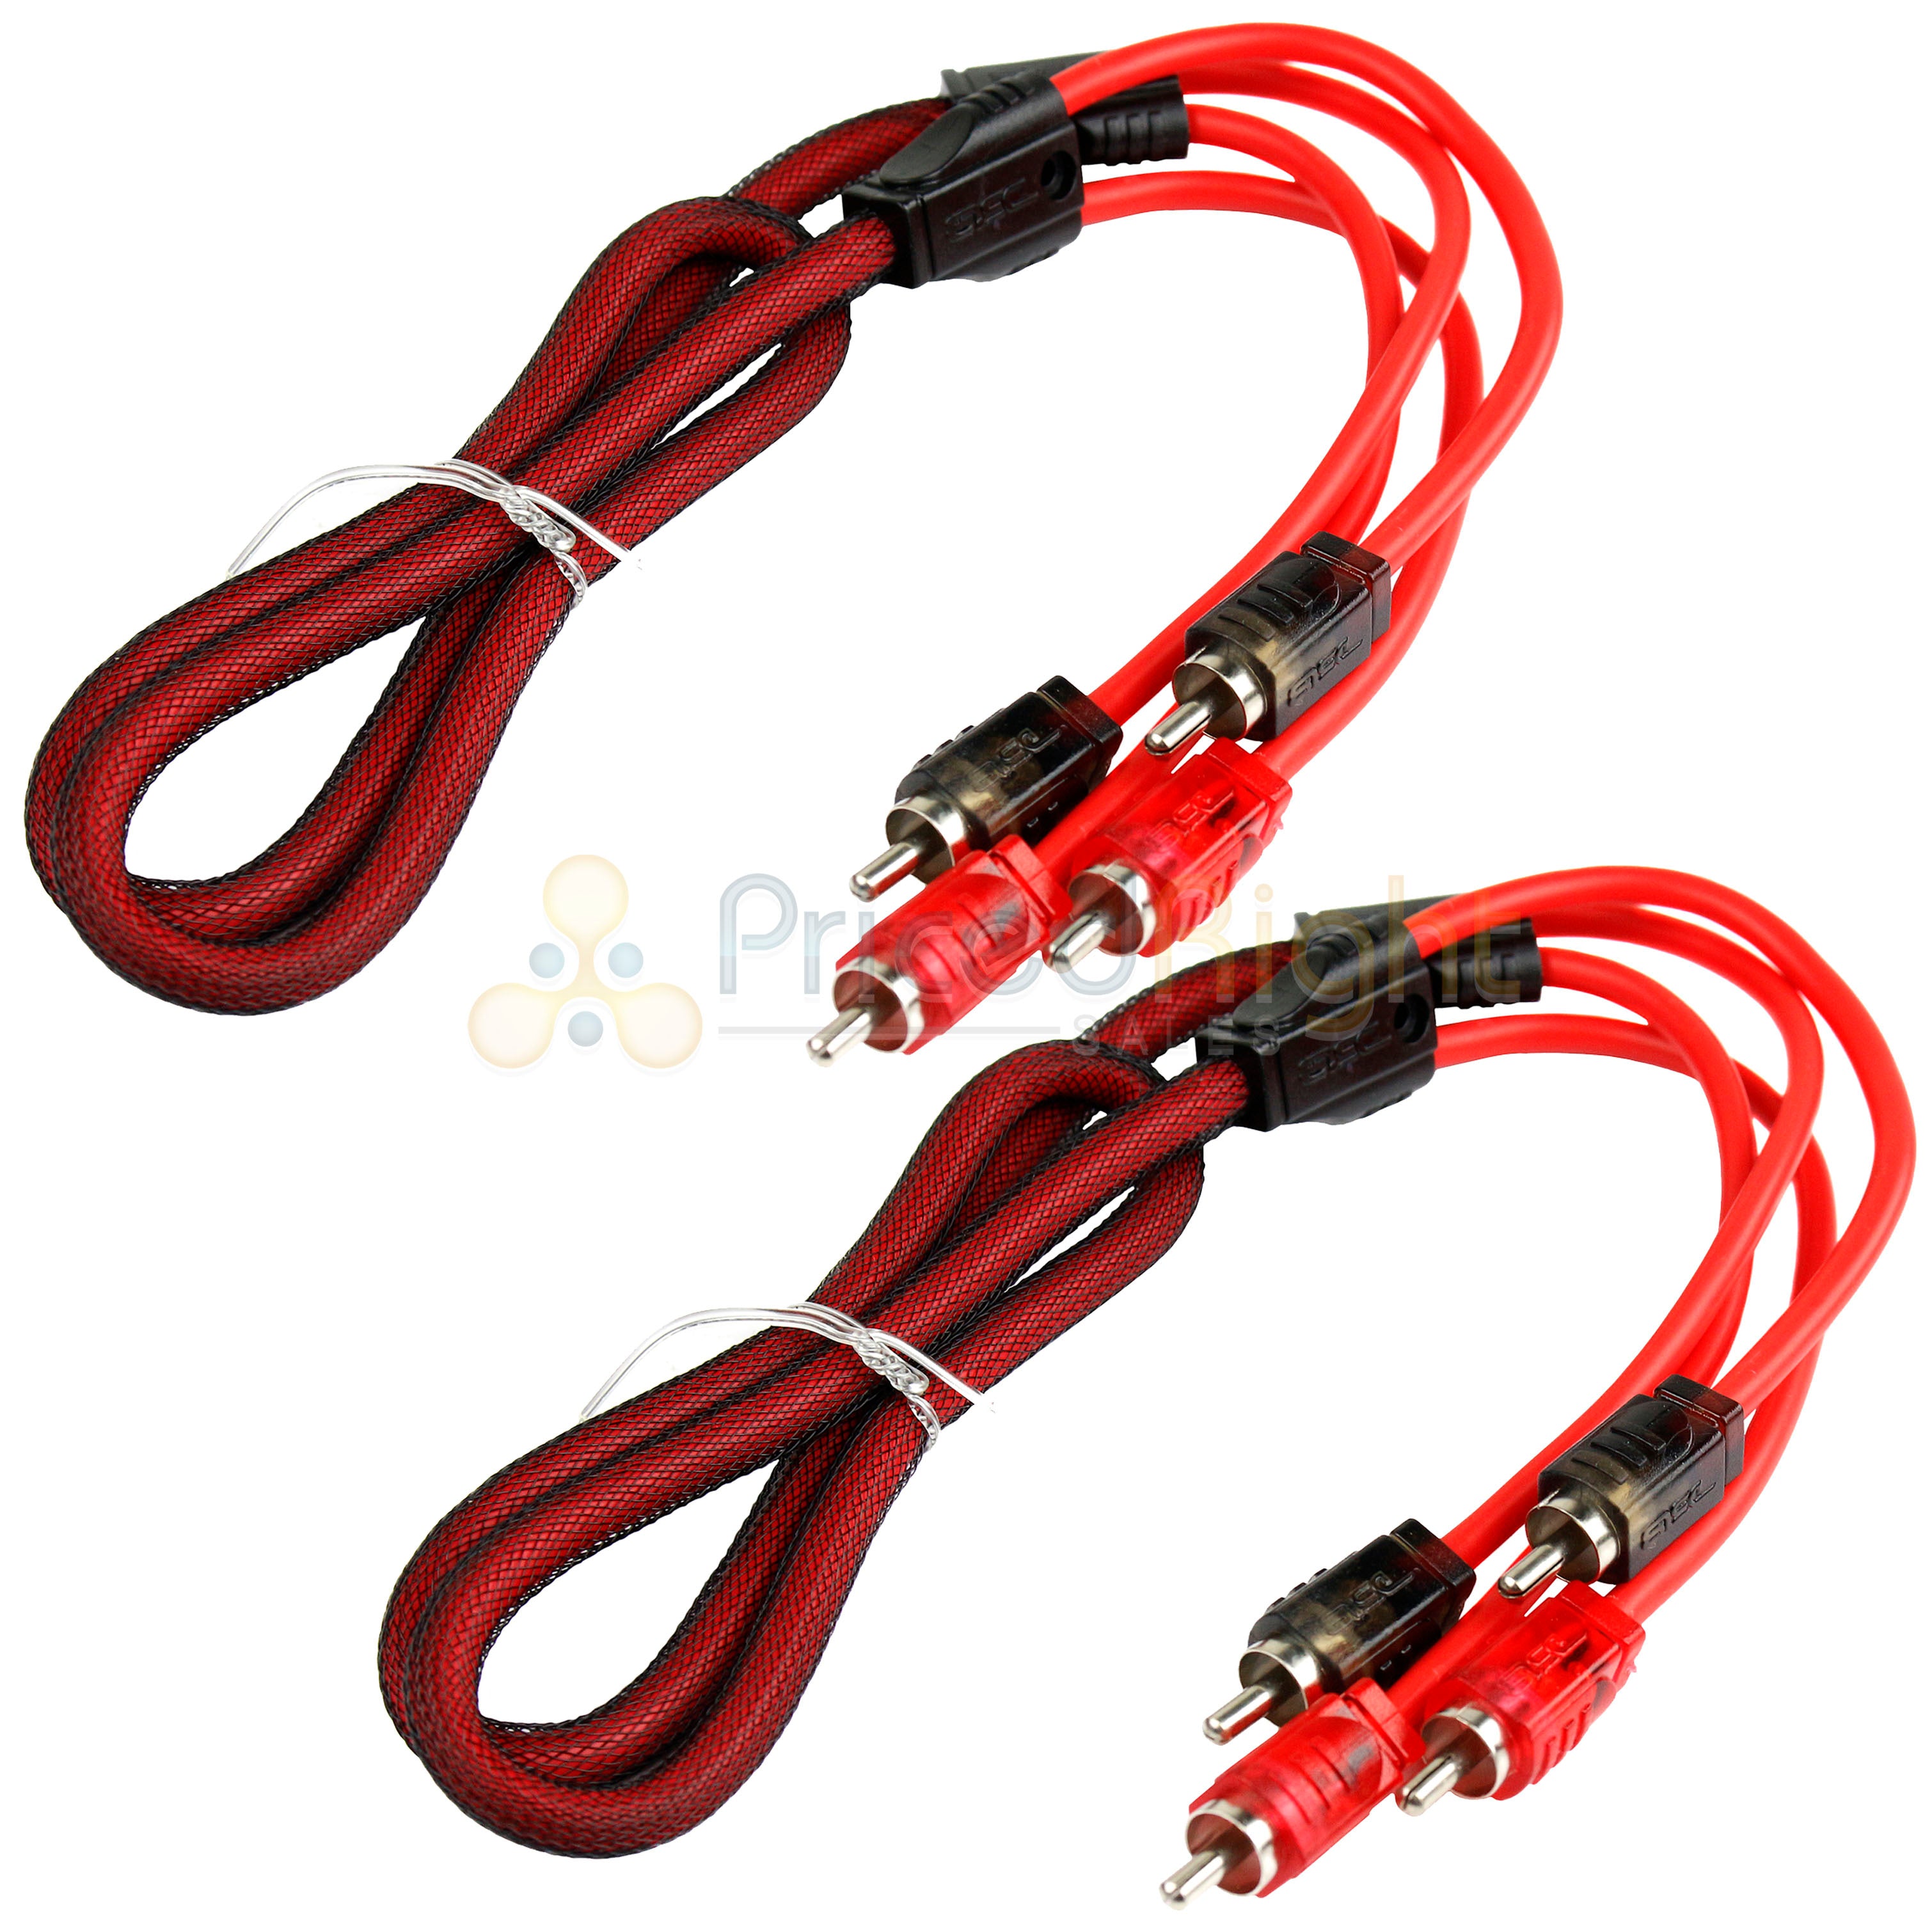 2 Pack 3 Ft RCA Cable OFC Interconnect DS18 R3 Competition Rated Performance Red